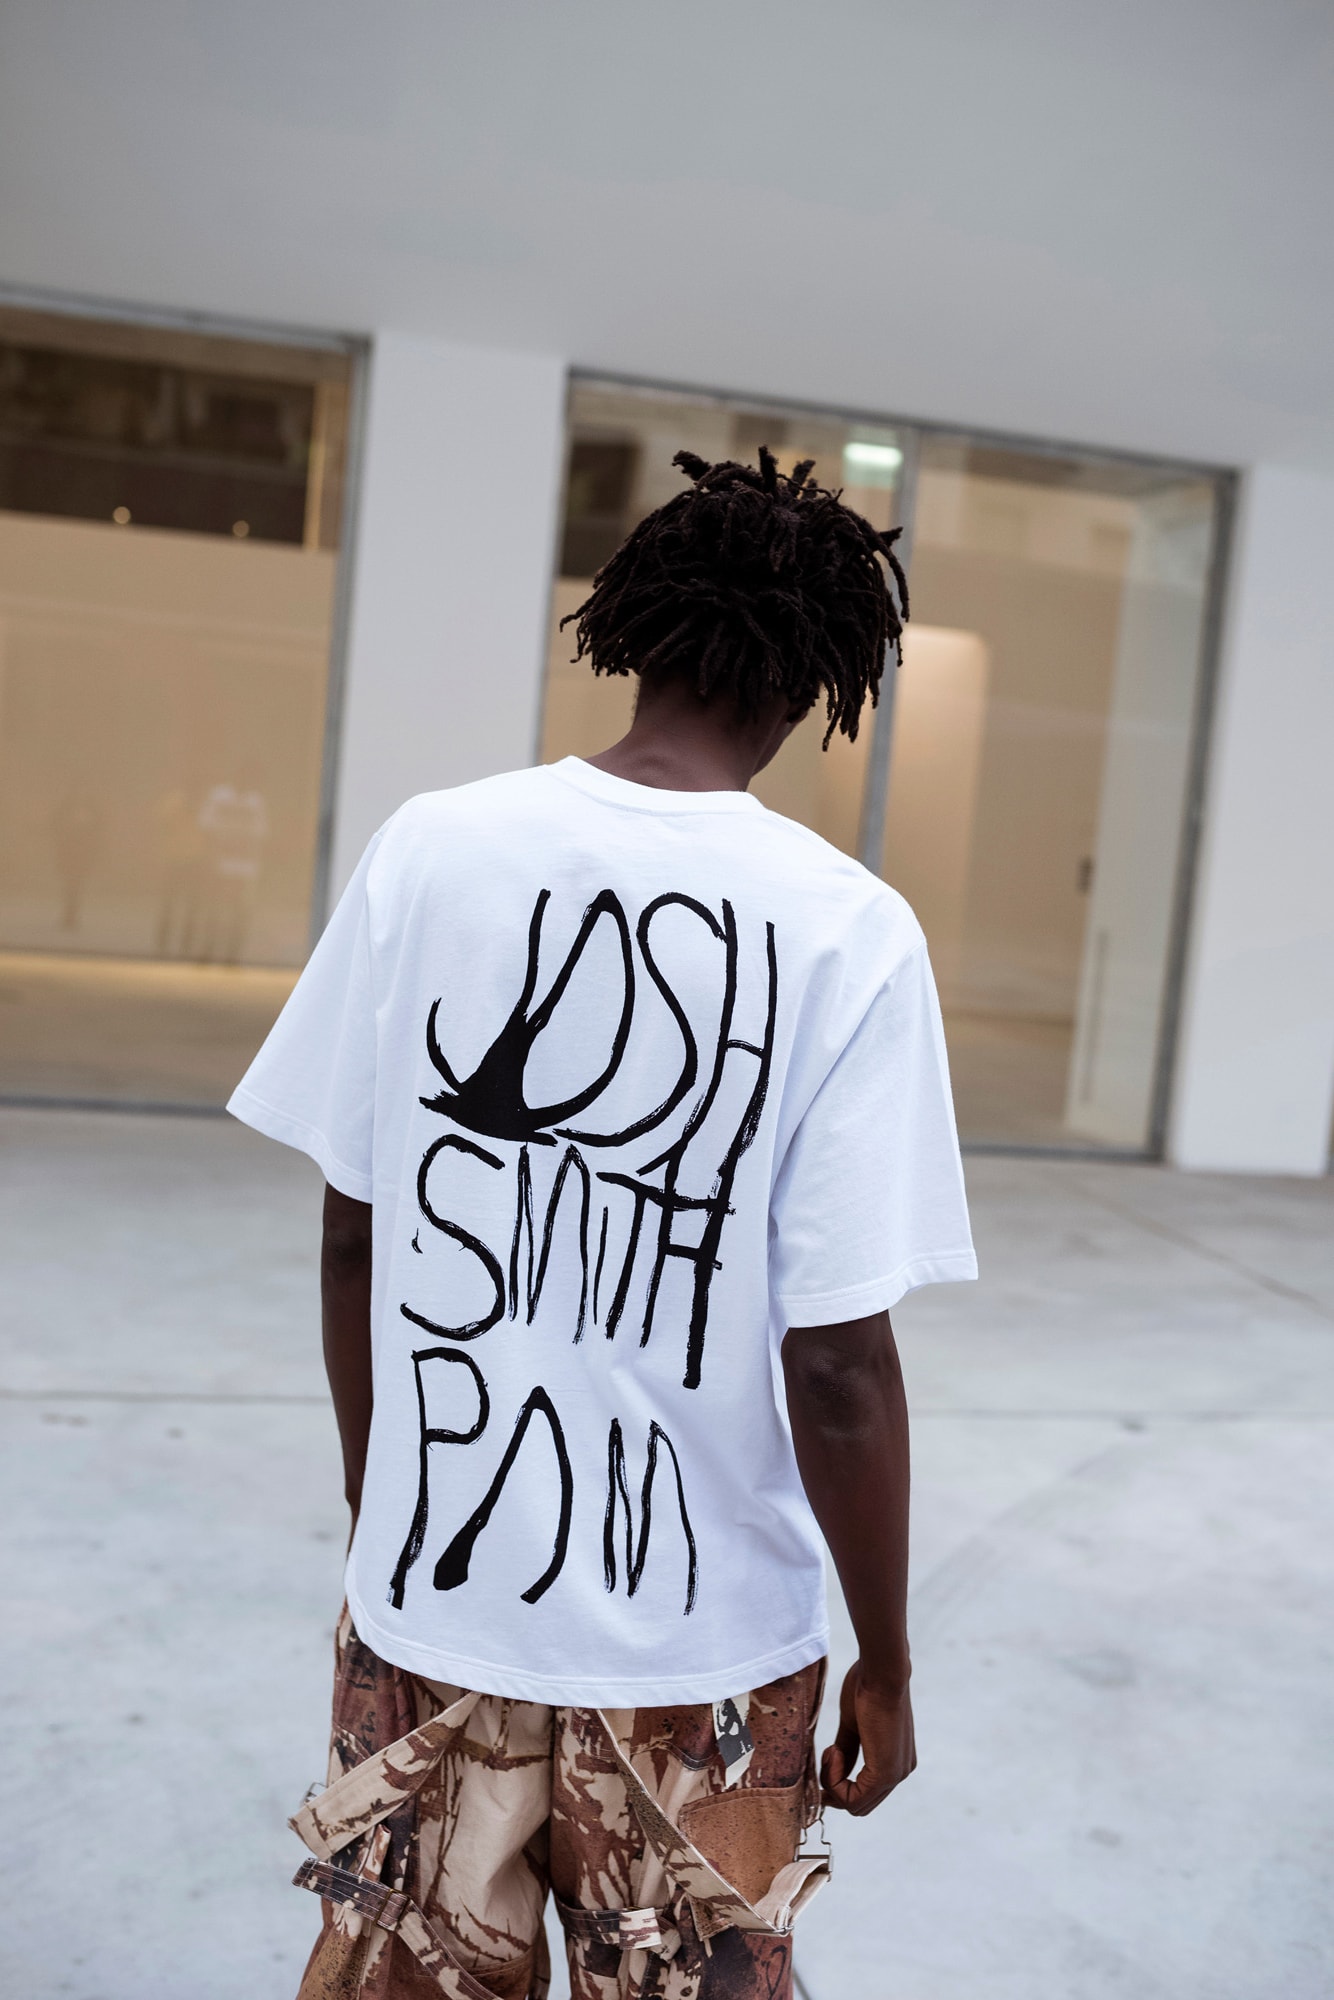 Josh Smith P.A.M. Capsule Collection Perks and Mini Stop Urban Camo T shirt Jacket Coat Pants Overalls Artist